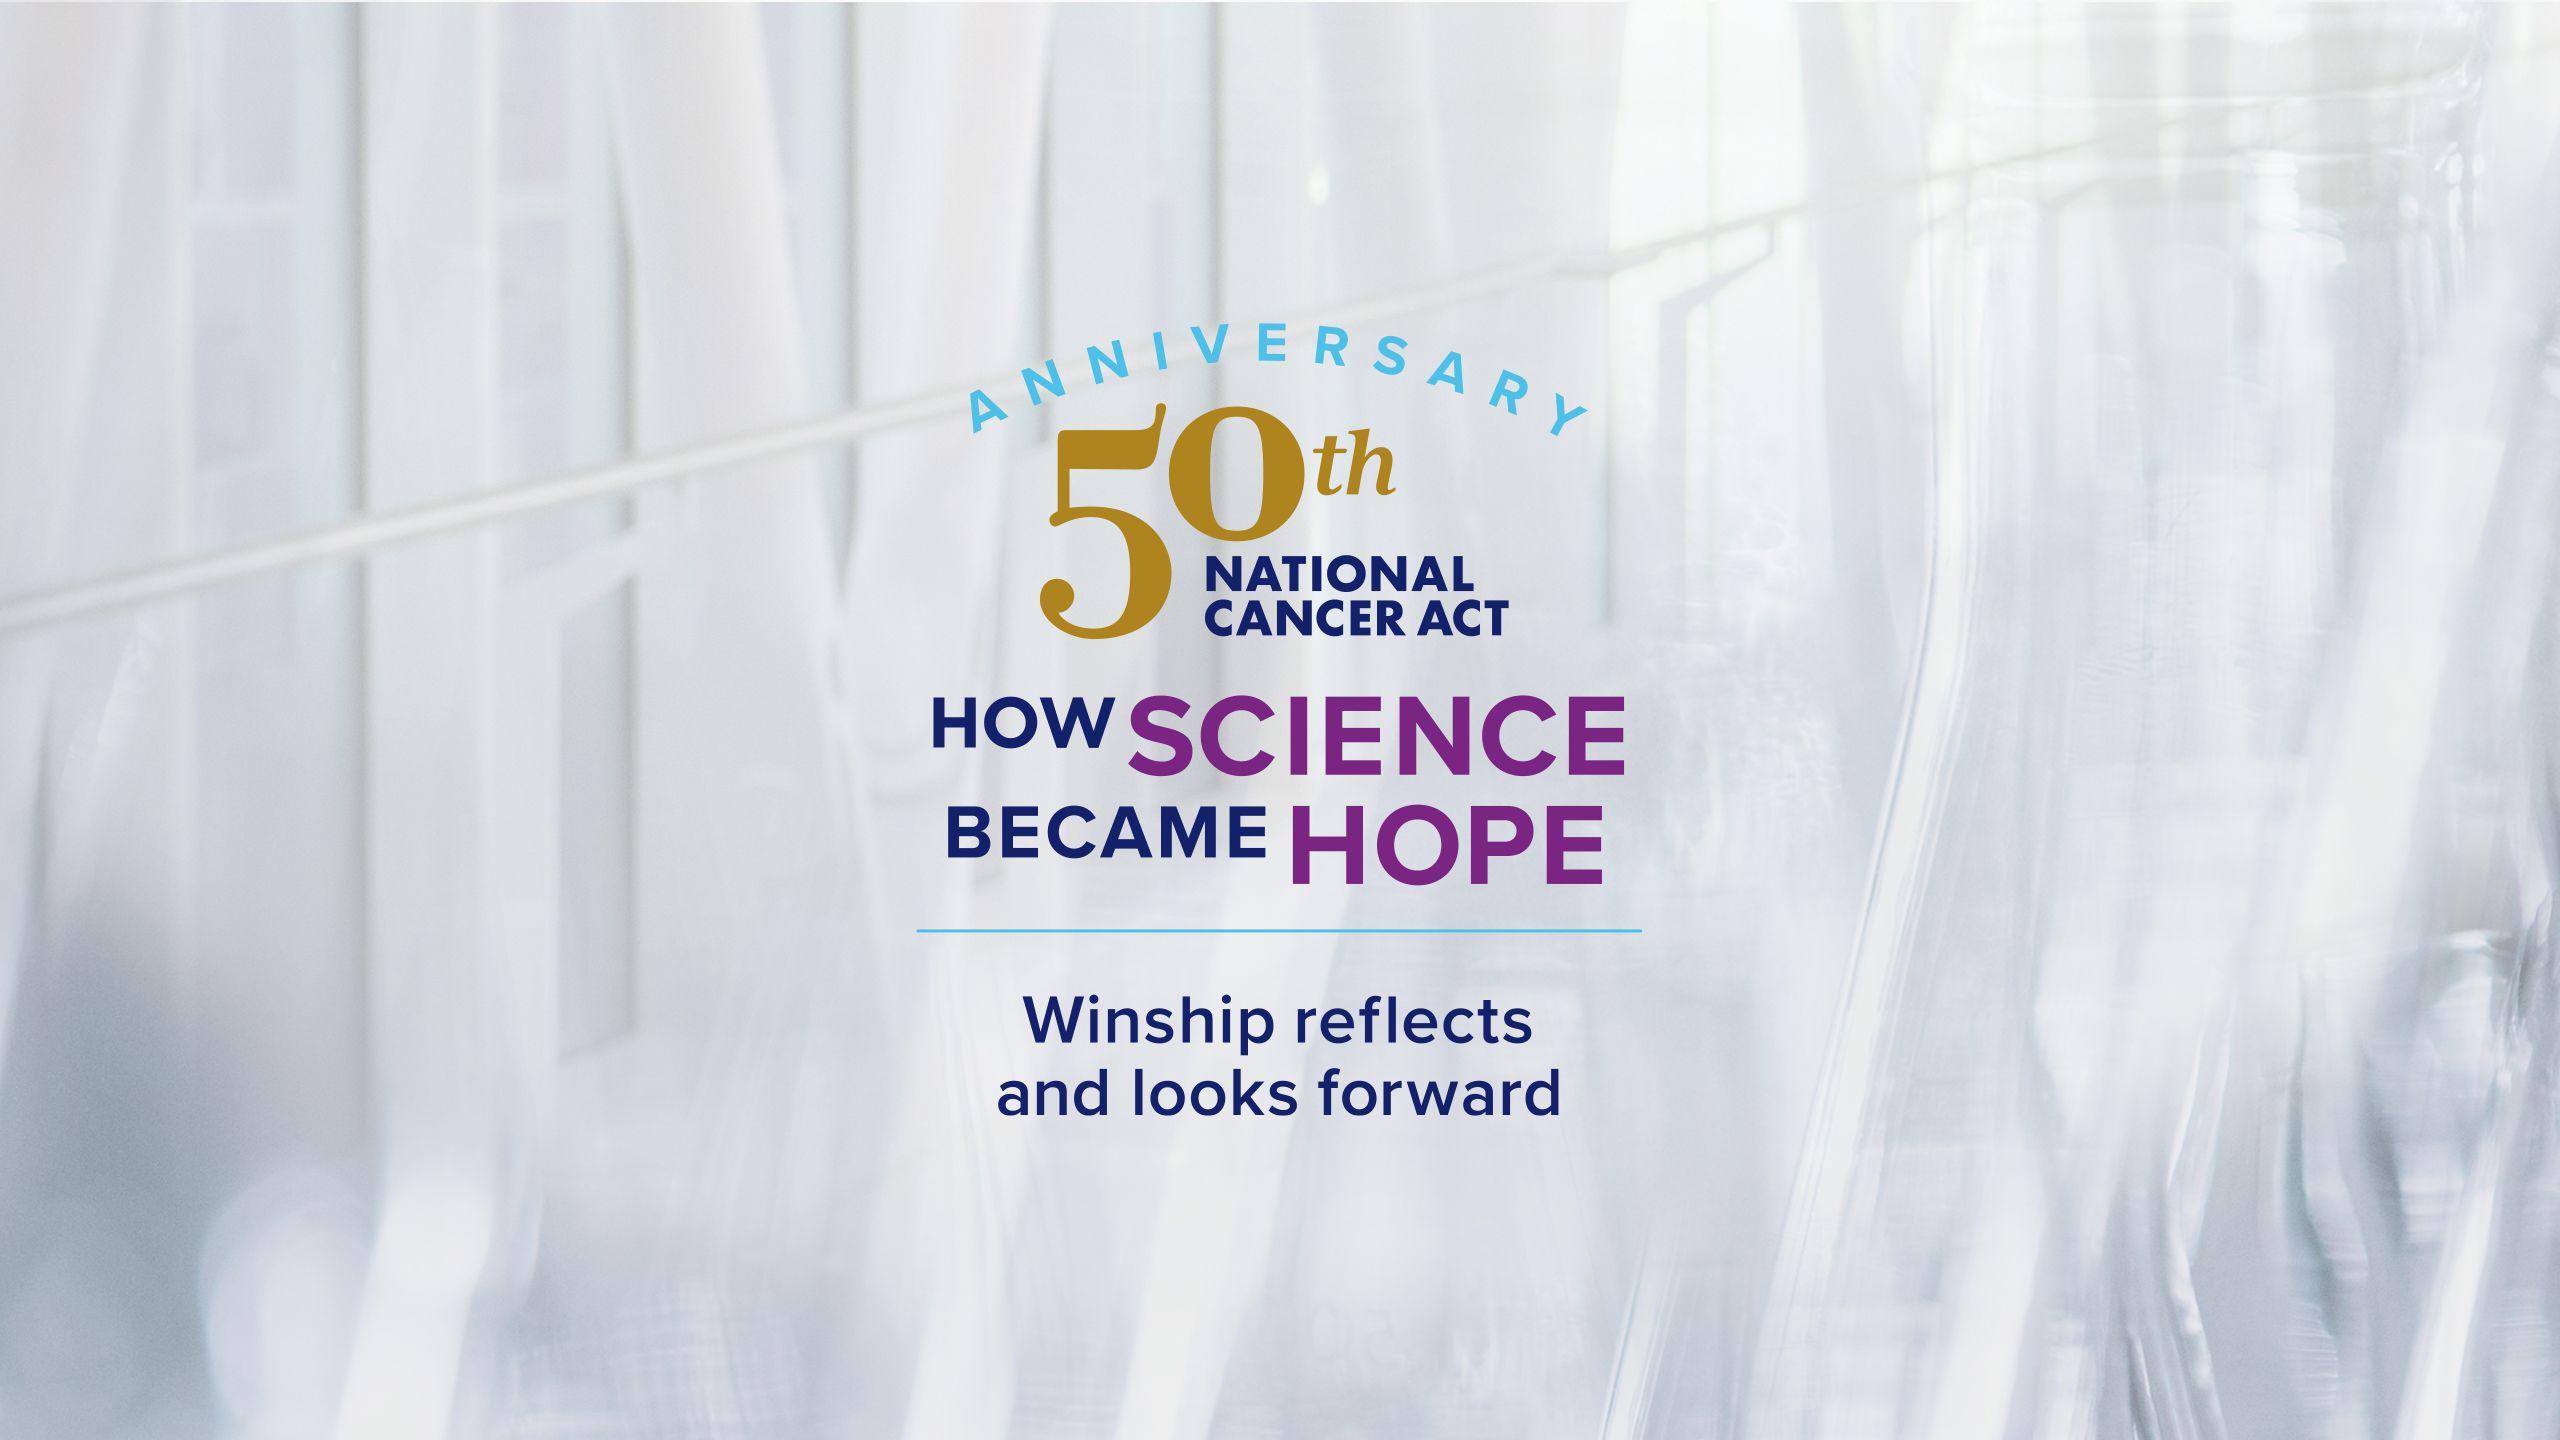 50th anniversary of the National Cancer Act How Science Became Hope, Winship reflects and looks forward intro